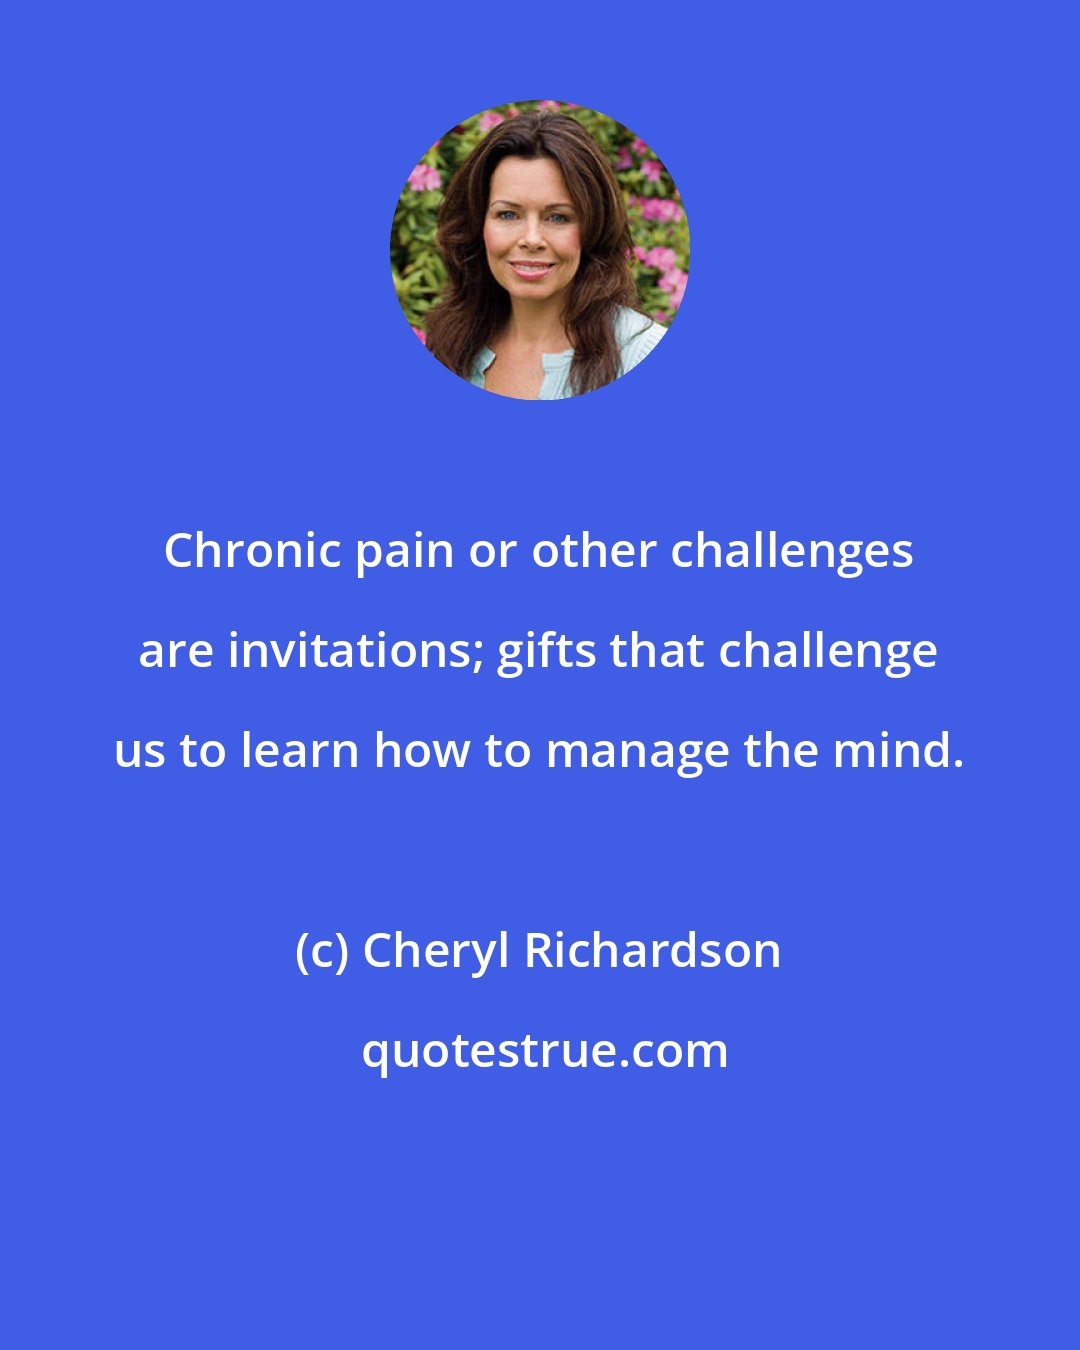 Cheryl Richardson: Chronic pain or other challenges are invitations; gifts that challenge us to learn how to manage the mind.